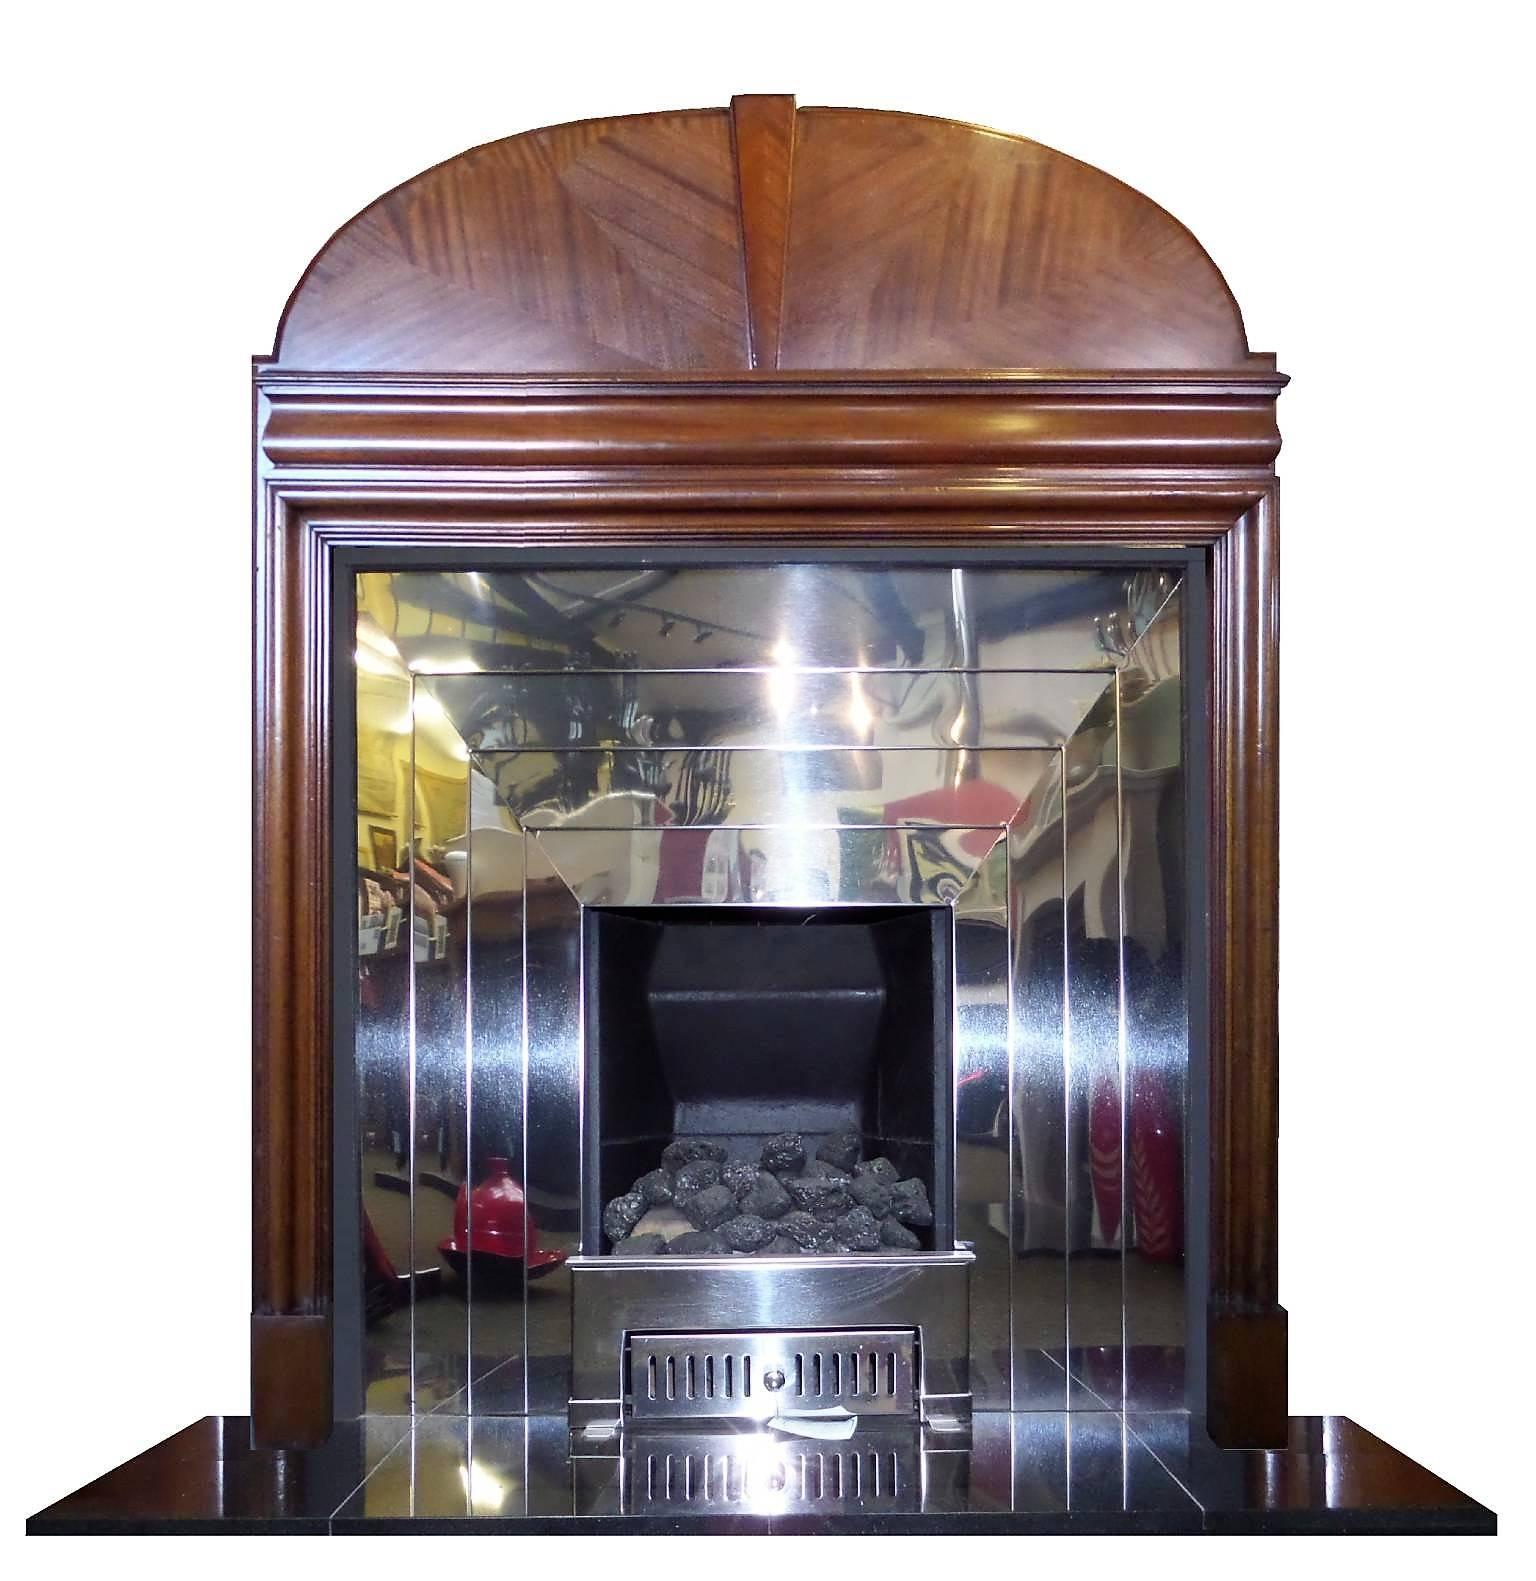 Woodwork Art Deco, 1930s Mahogany Wood Mantel Fireplace Surround For Sale